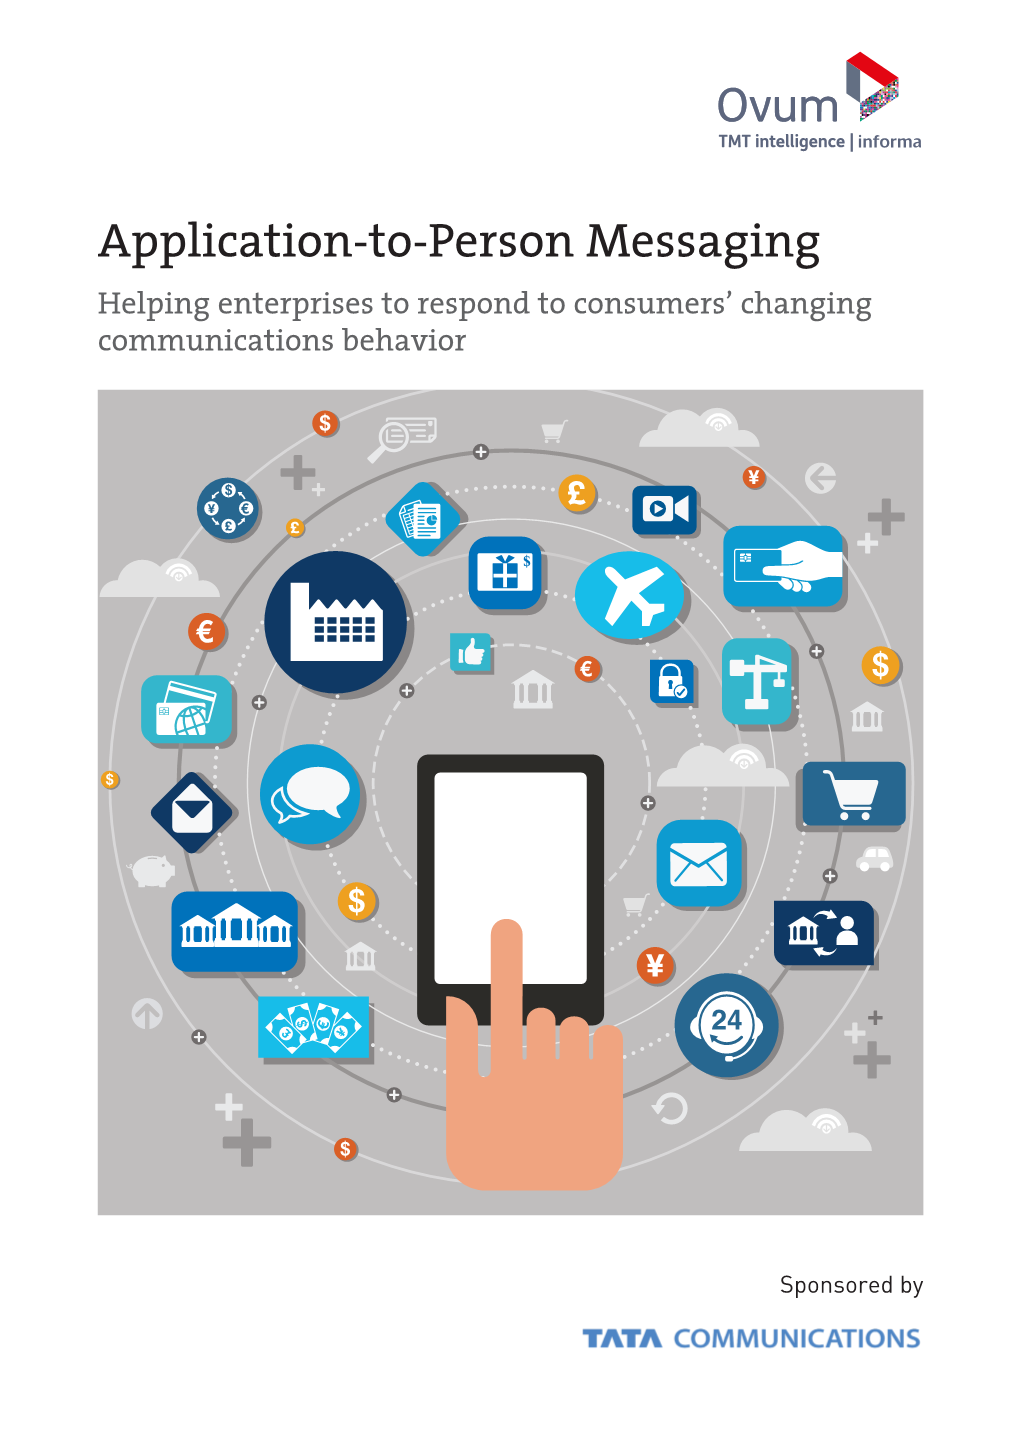 Application-To-Person Messaging Helping Enterprises to Respond to Consumers’ Changing Communications Behavior